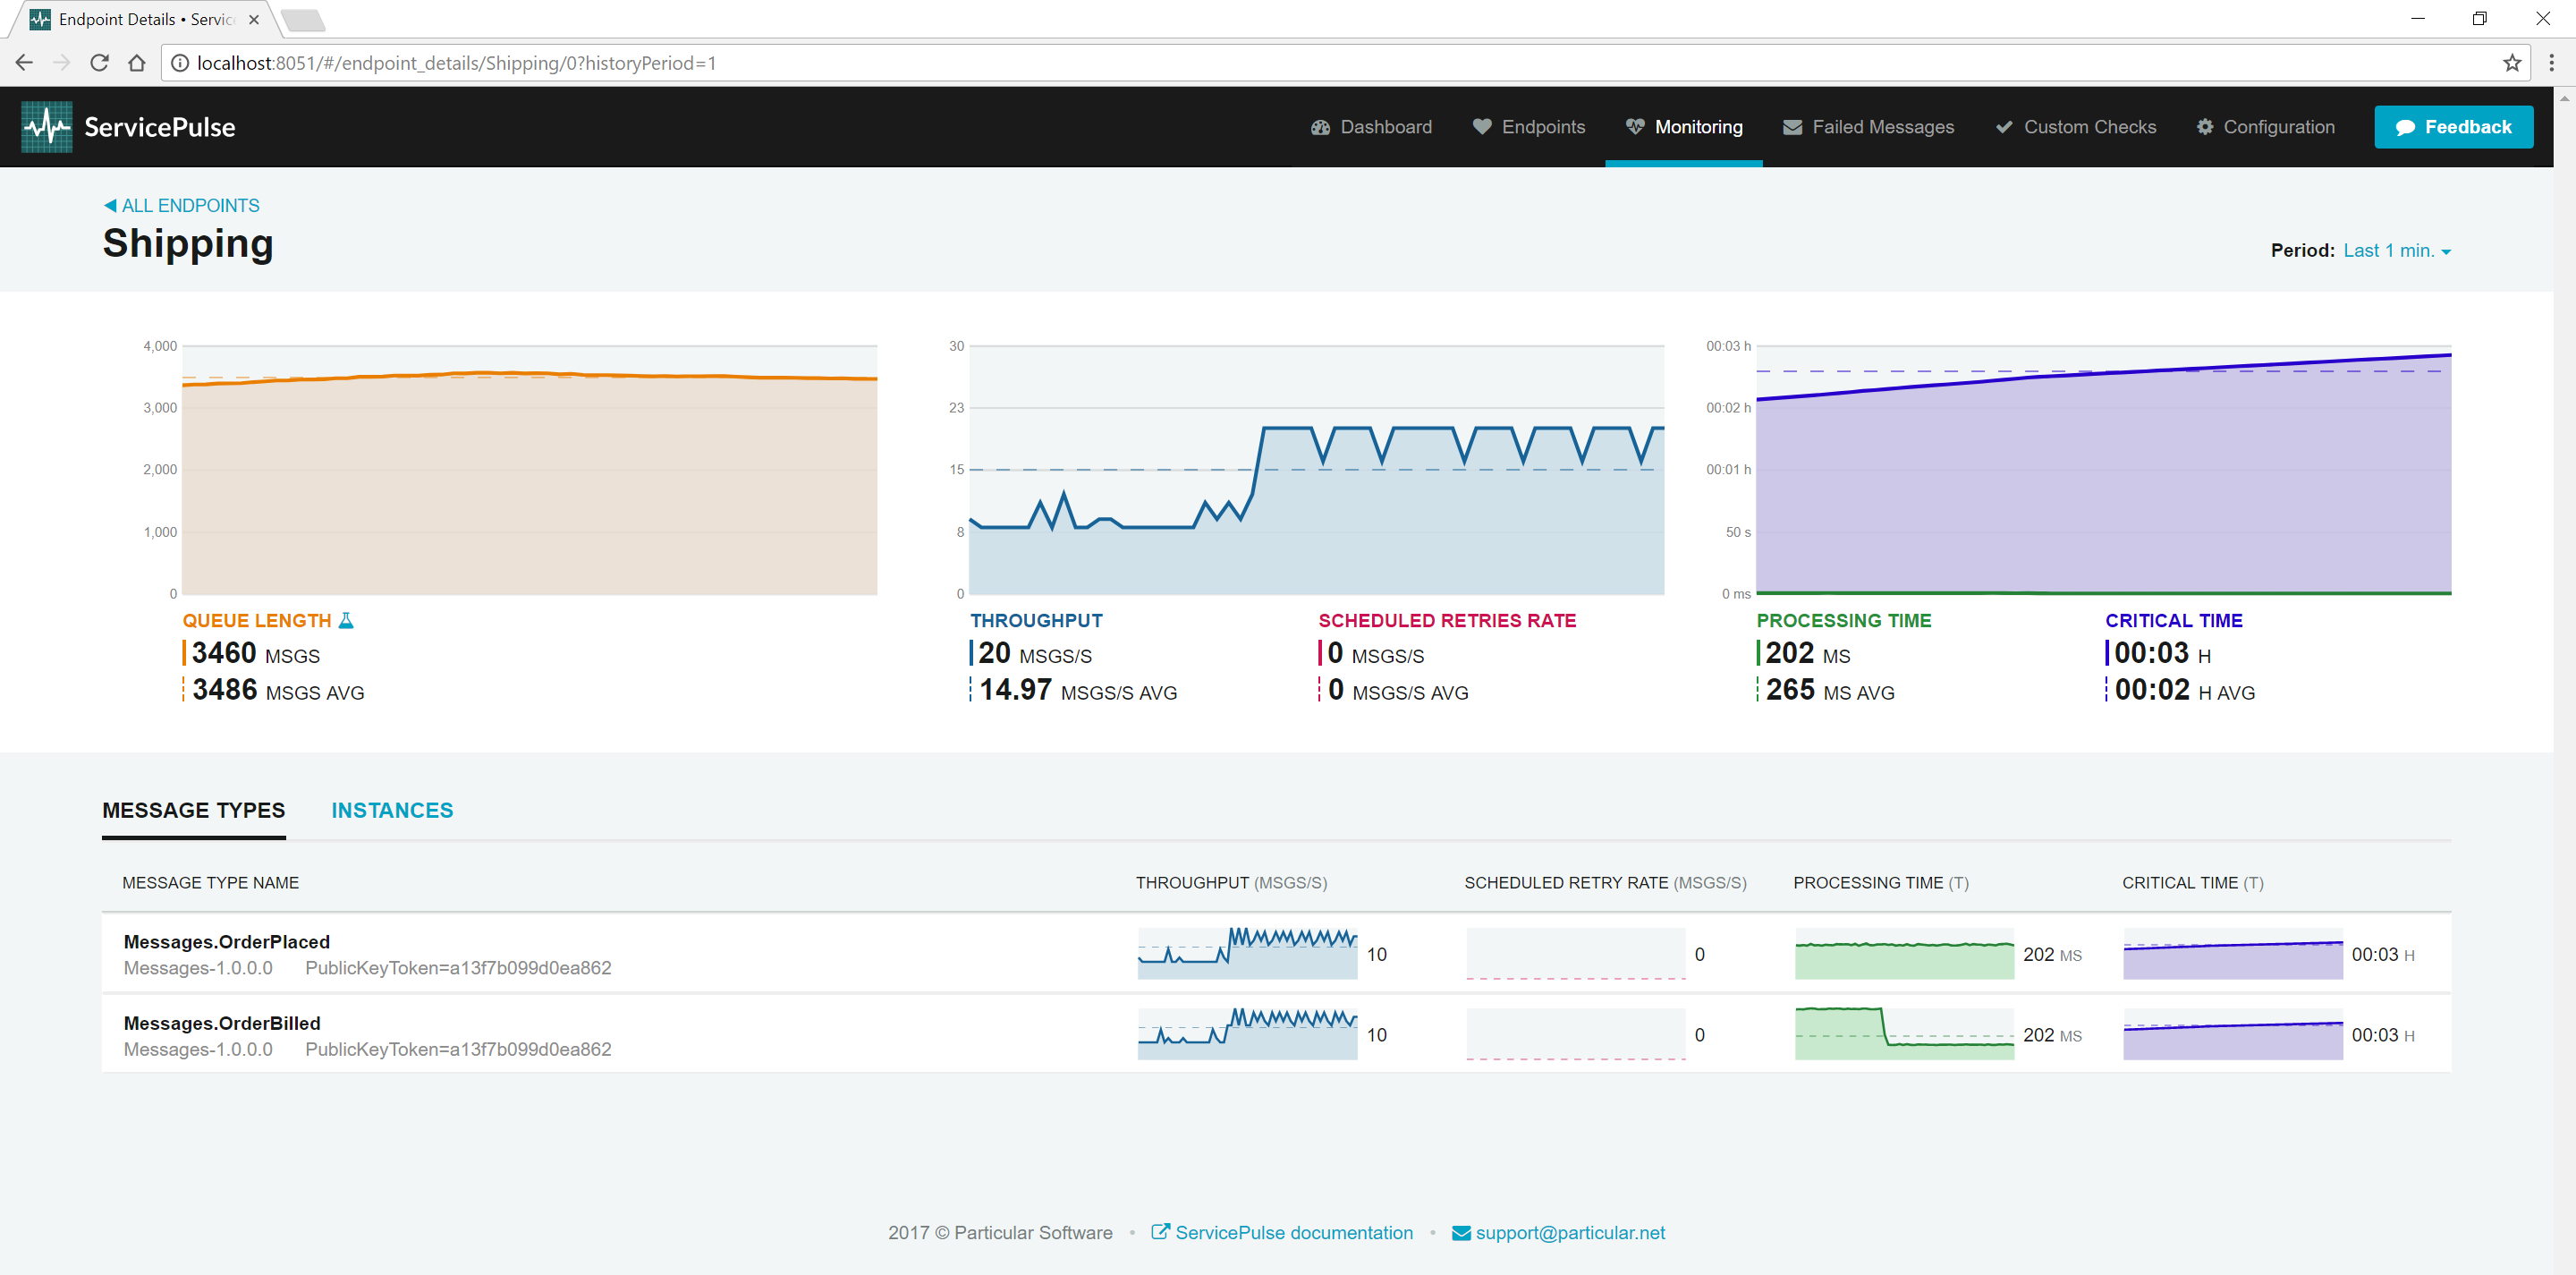 Service Pulse monitoring details - Shipping - OrderBilled is fast